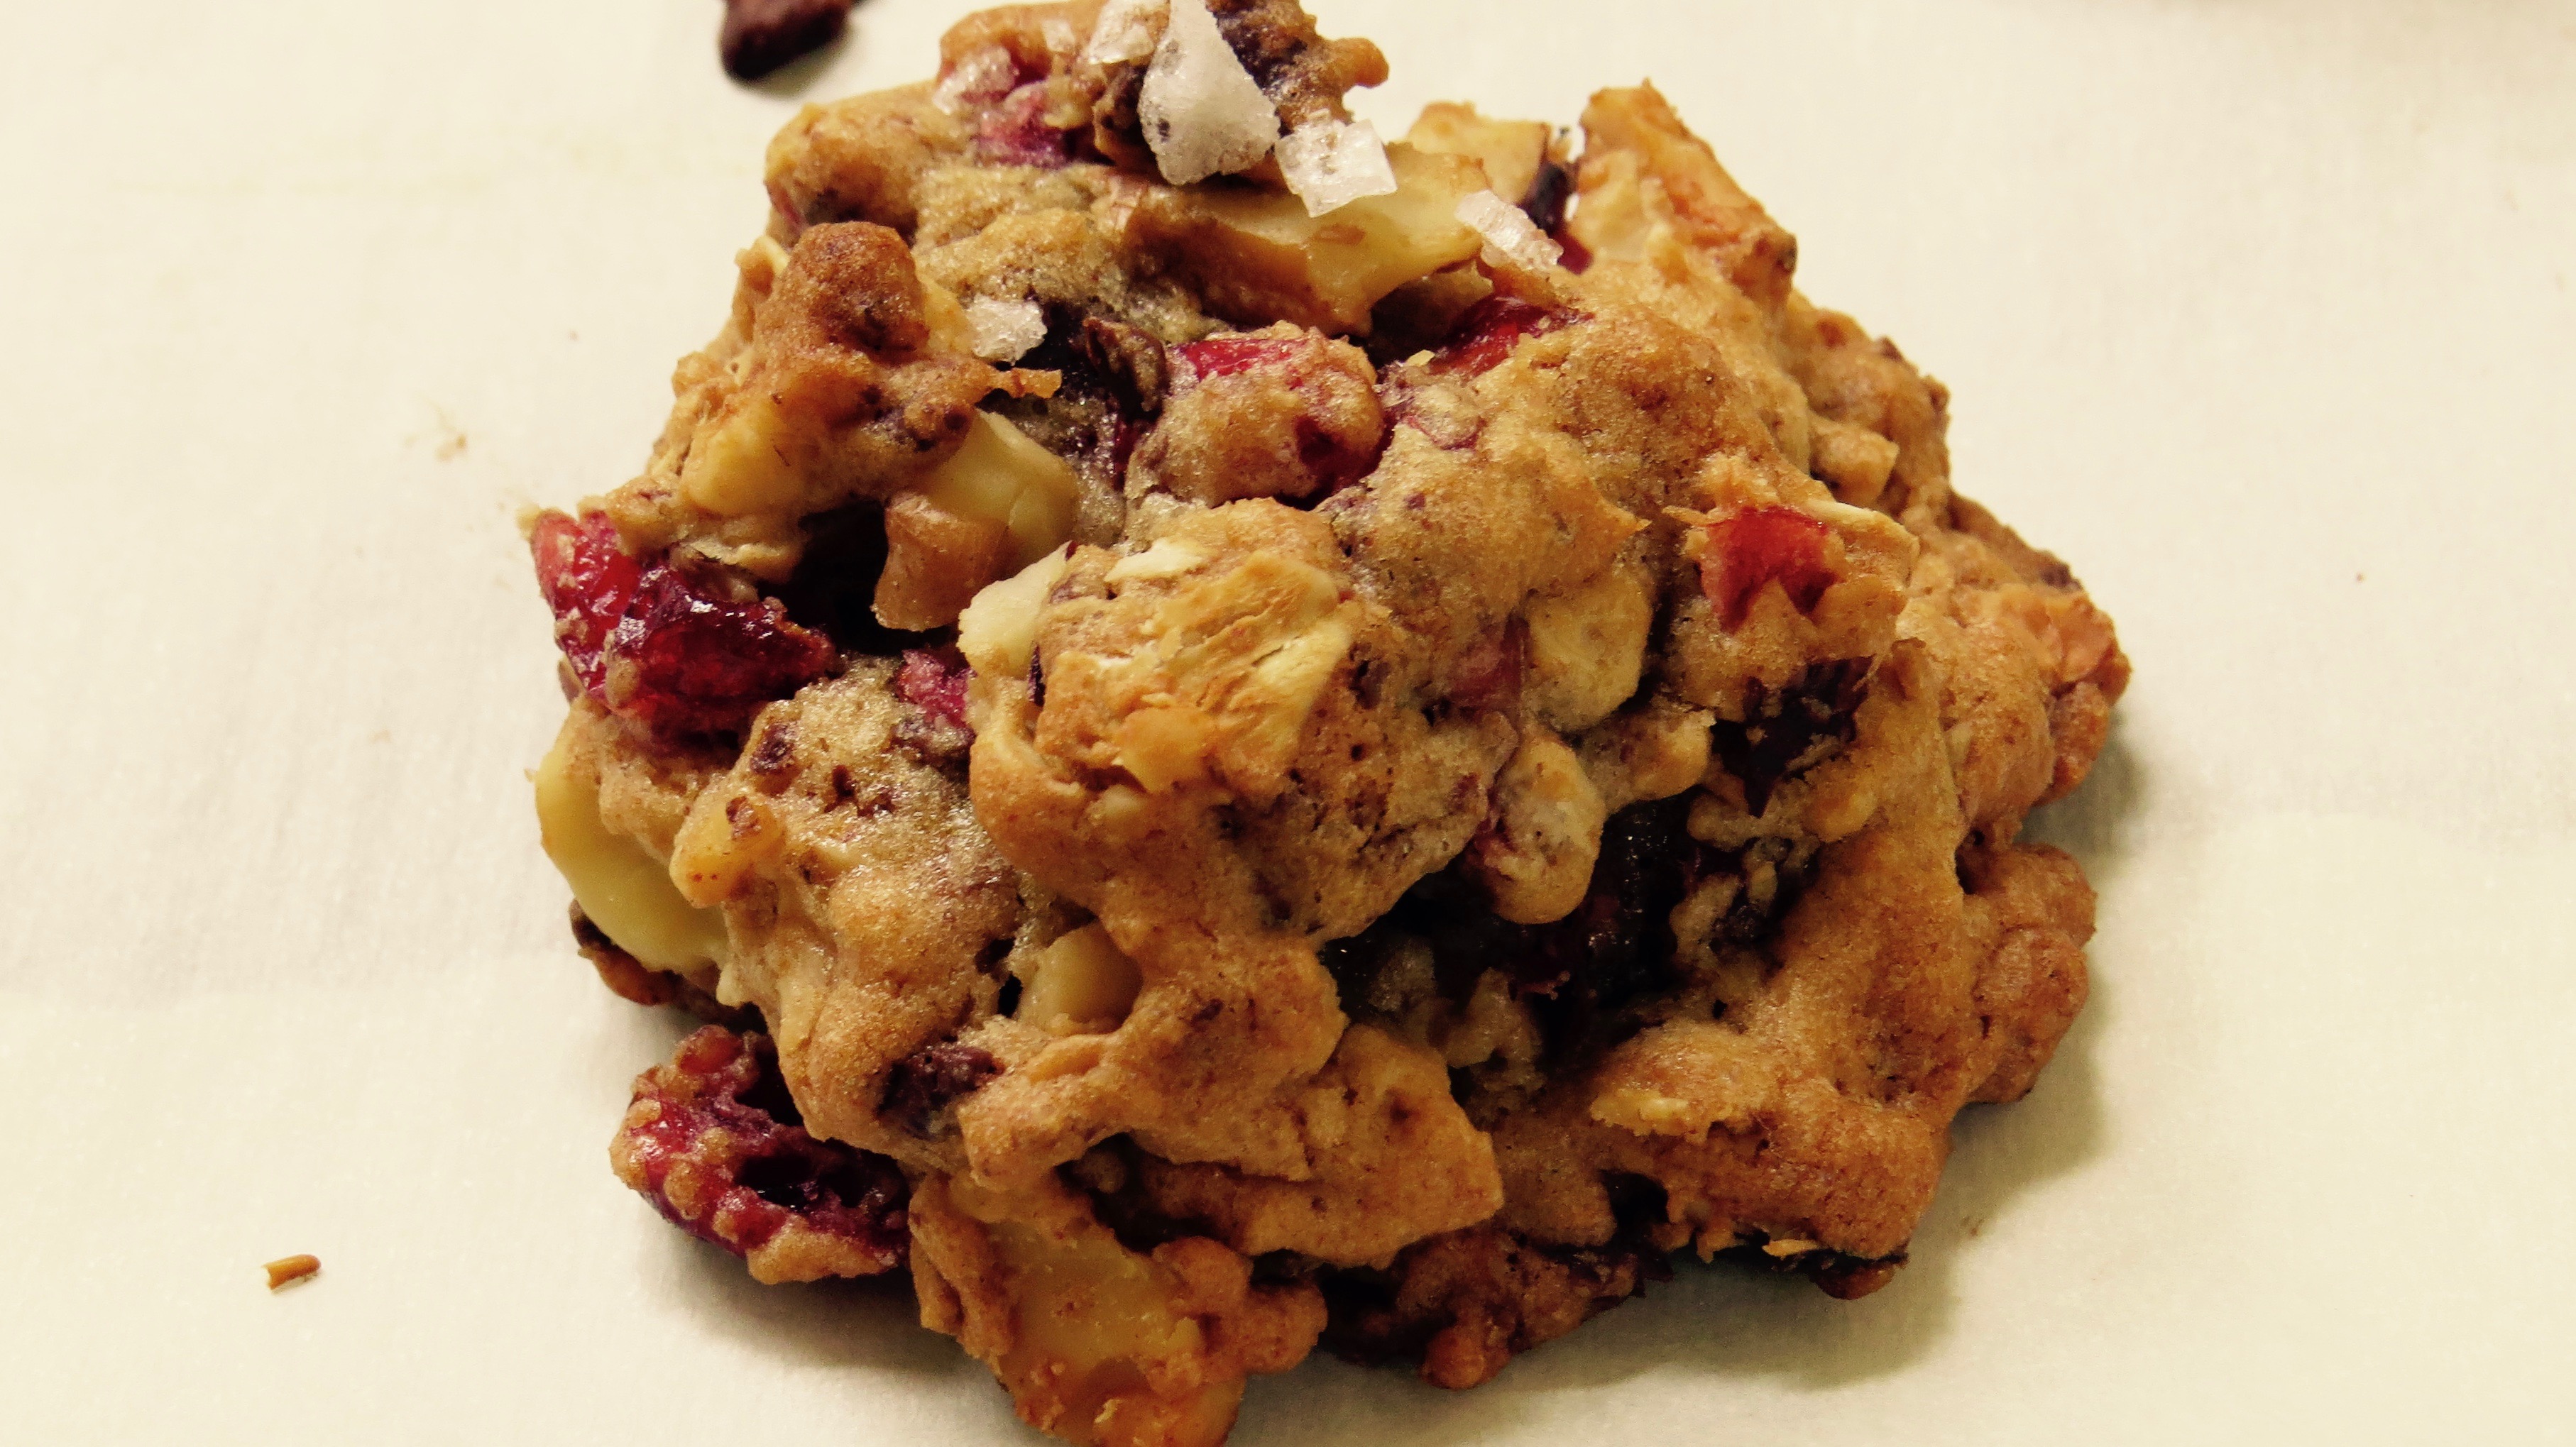 Mmmmm. dark chocolate, dried cherries, toasted walnuts and oatmeal - what's Better Than This?